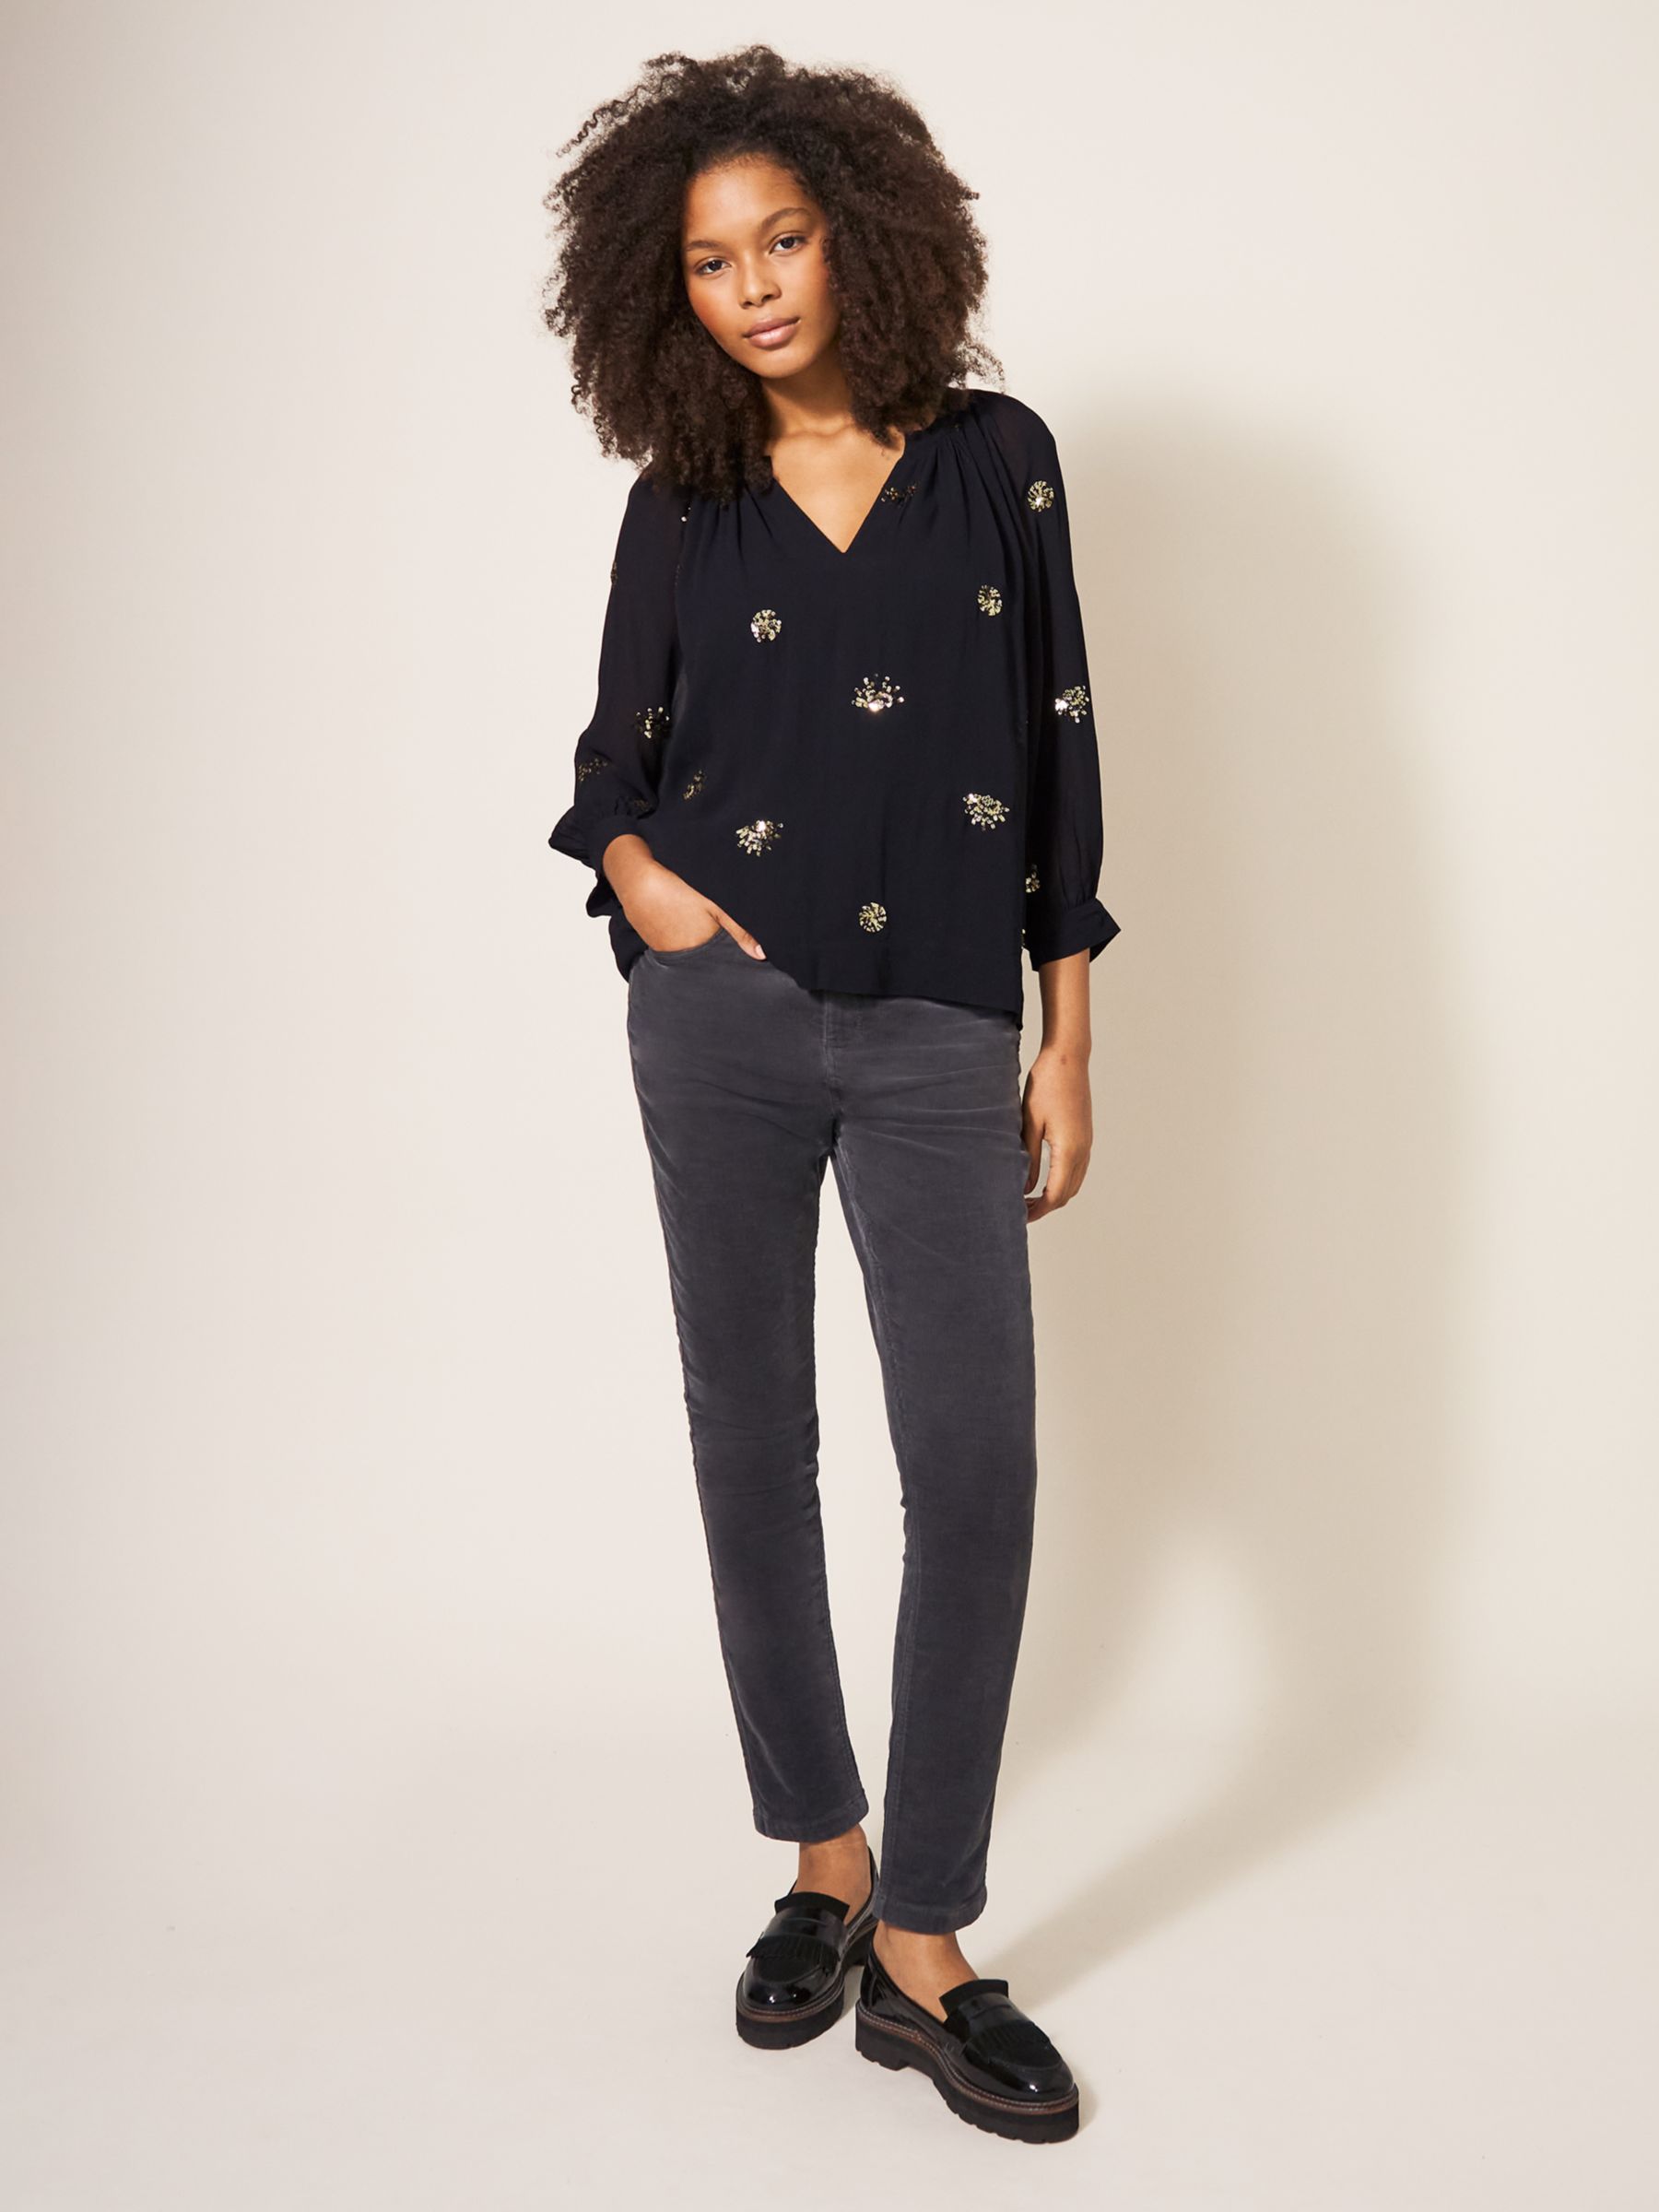 White Stuff Astrid Sequin Top, Black/Gold at John Lewis & Partners